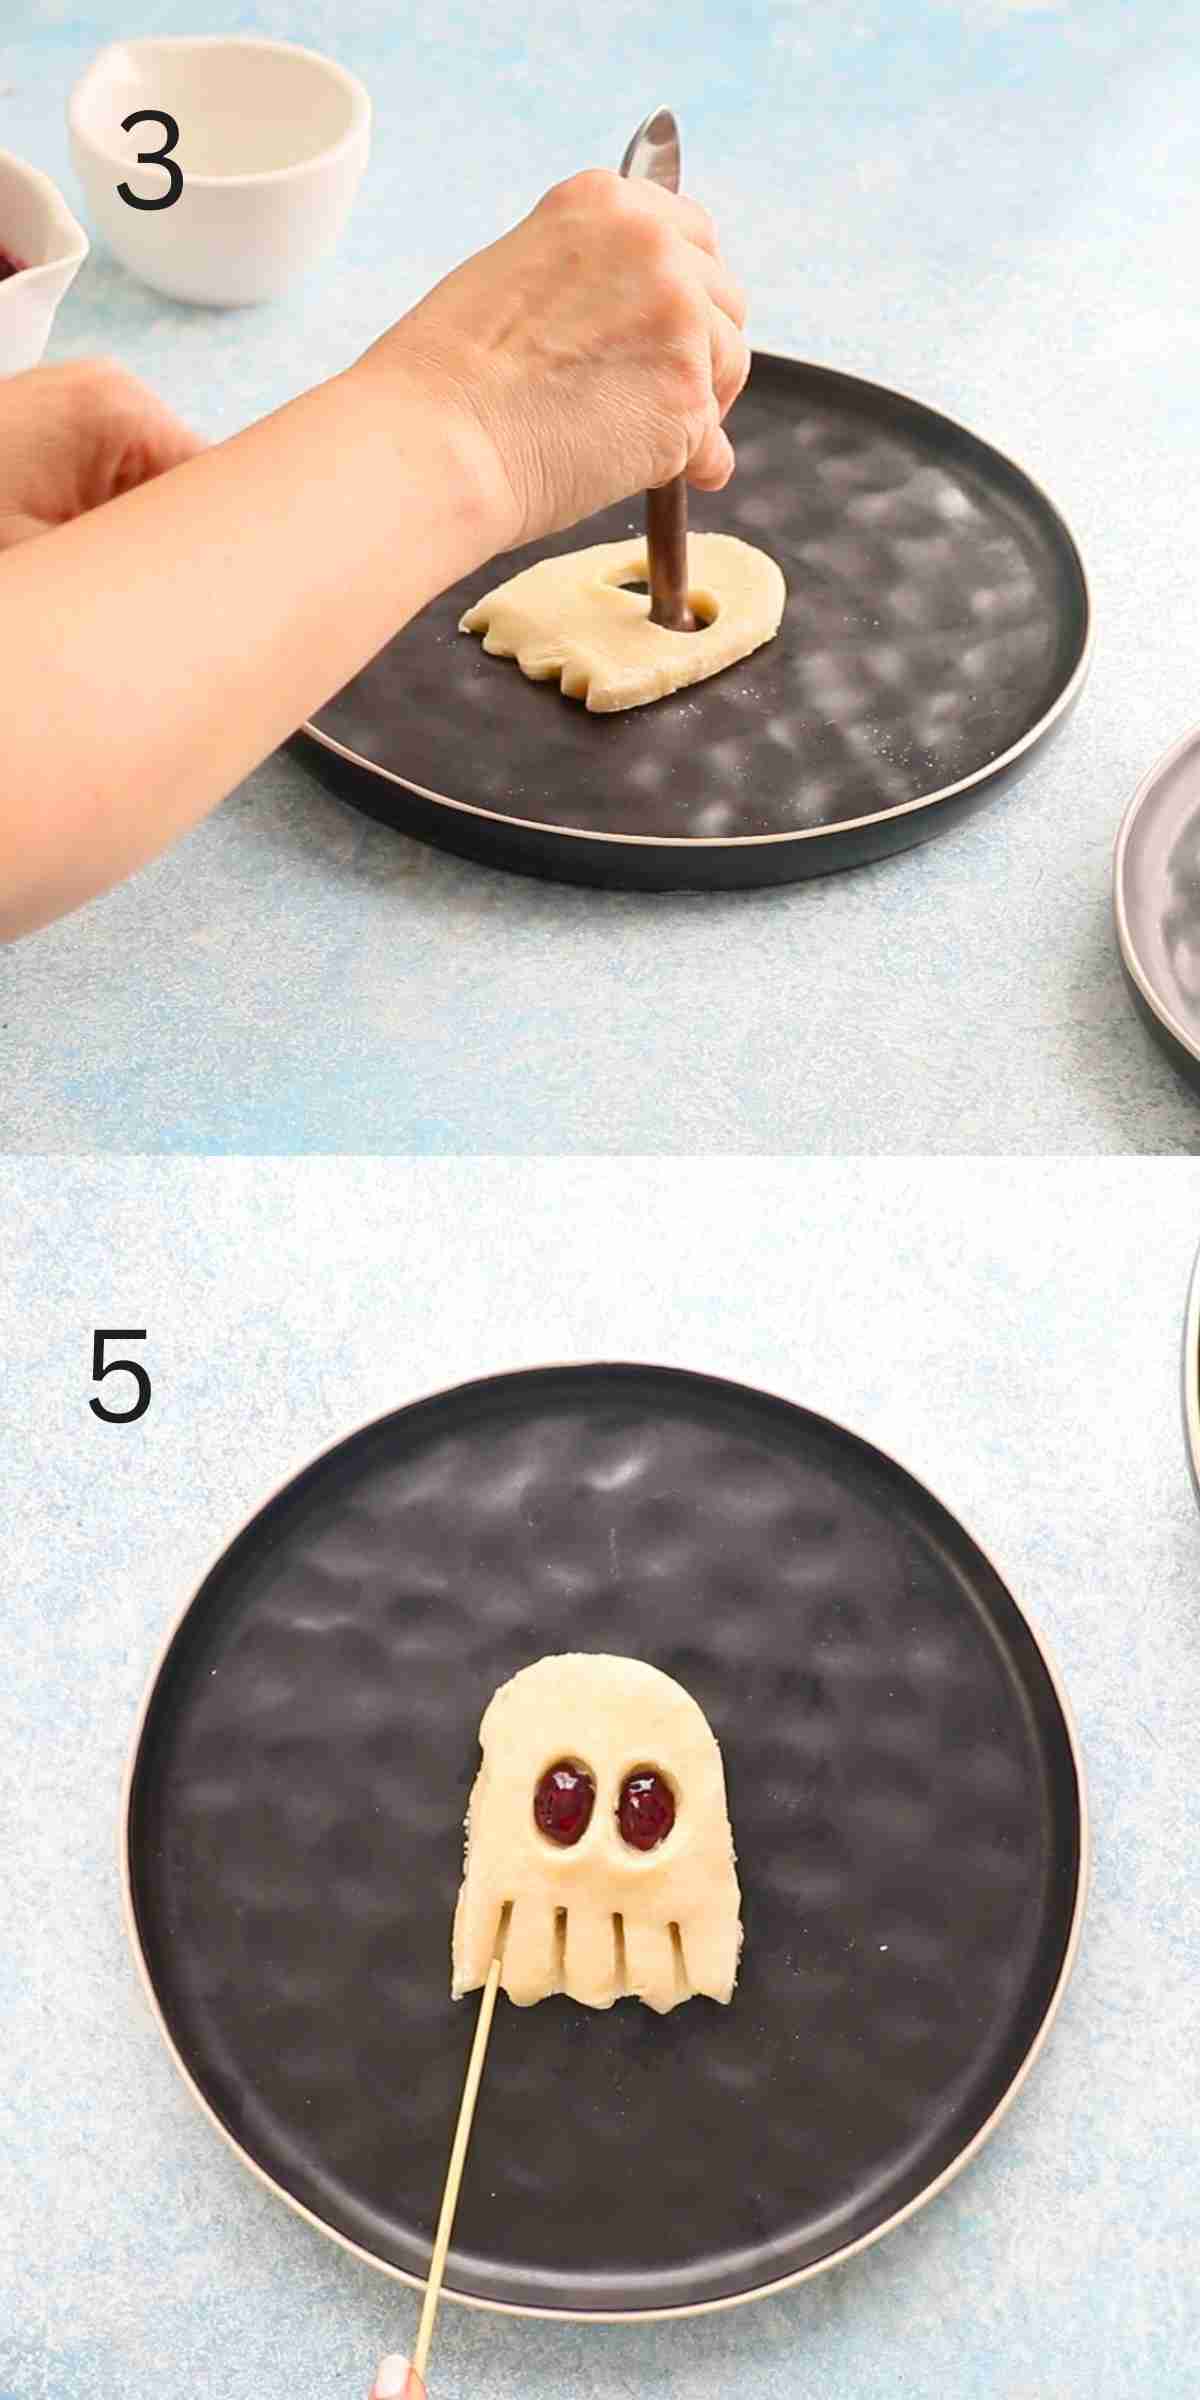 2 photo collage of a hand assembling ghost shape using a cut pie crust.